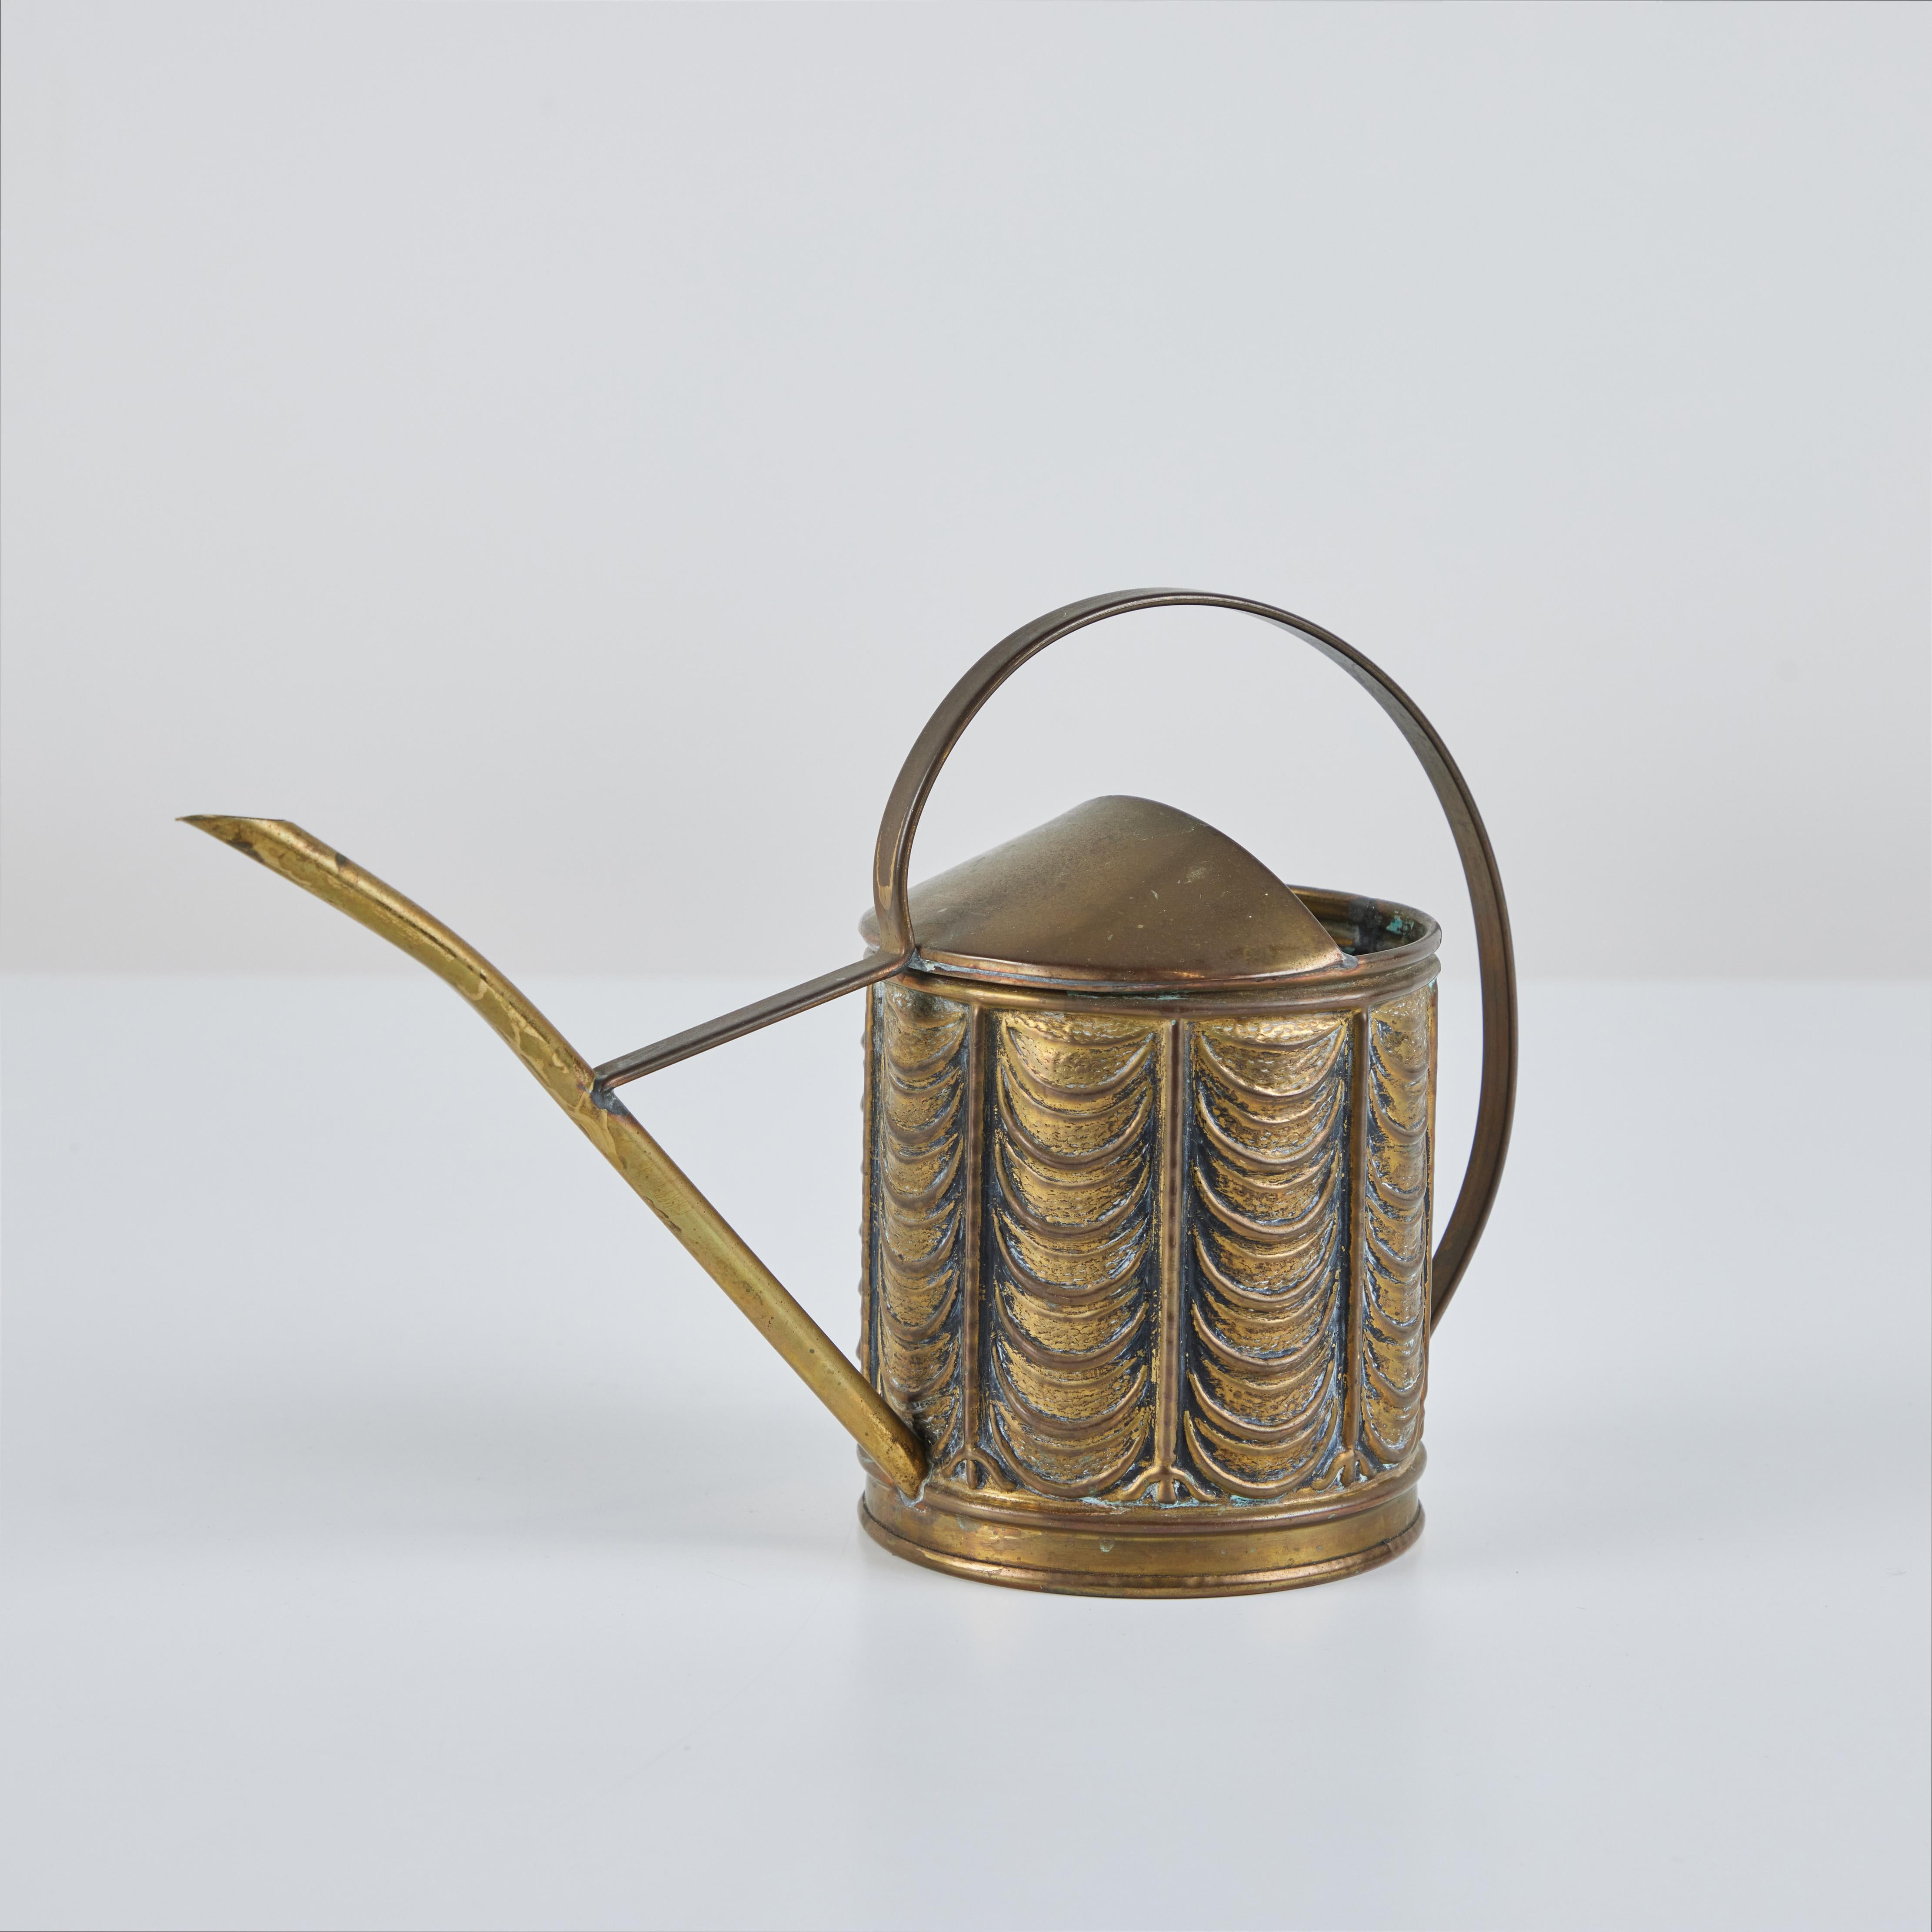 Art Deco brass watering can for Peerage c.1920's, England. This piece features a brass handle and spout with a textured body.
Vessel is impressed Made in England on the underside.

Dimensions
10